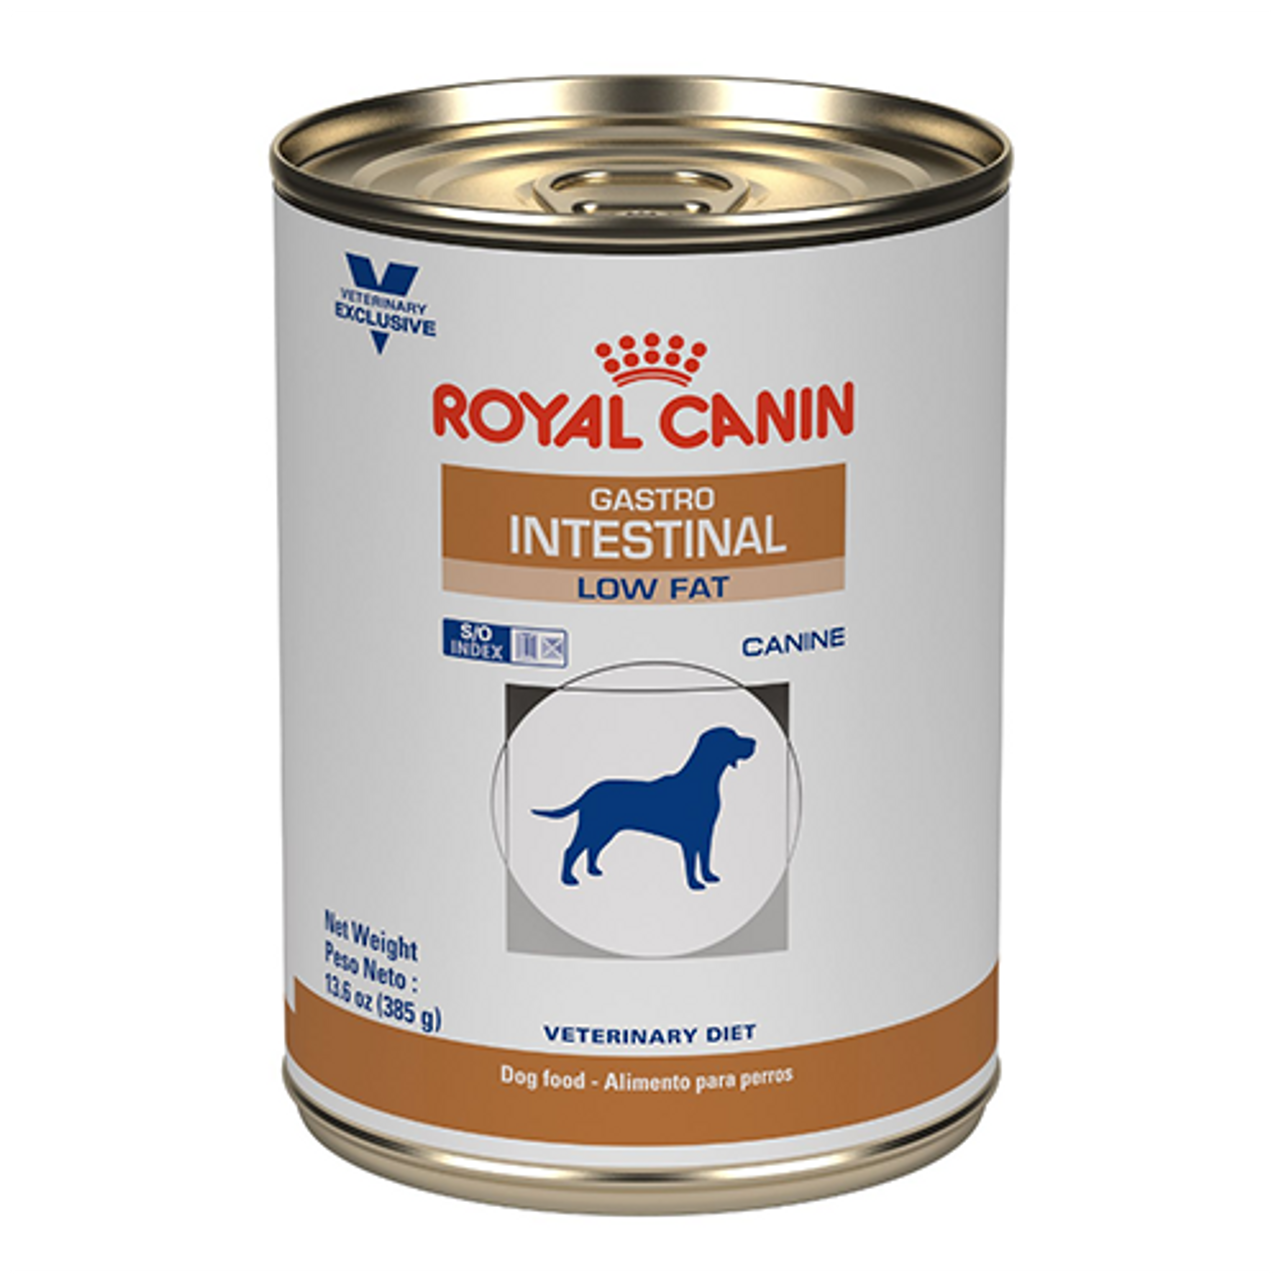 royal canin selected protein canned dog food